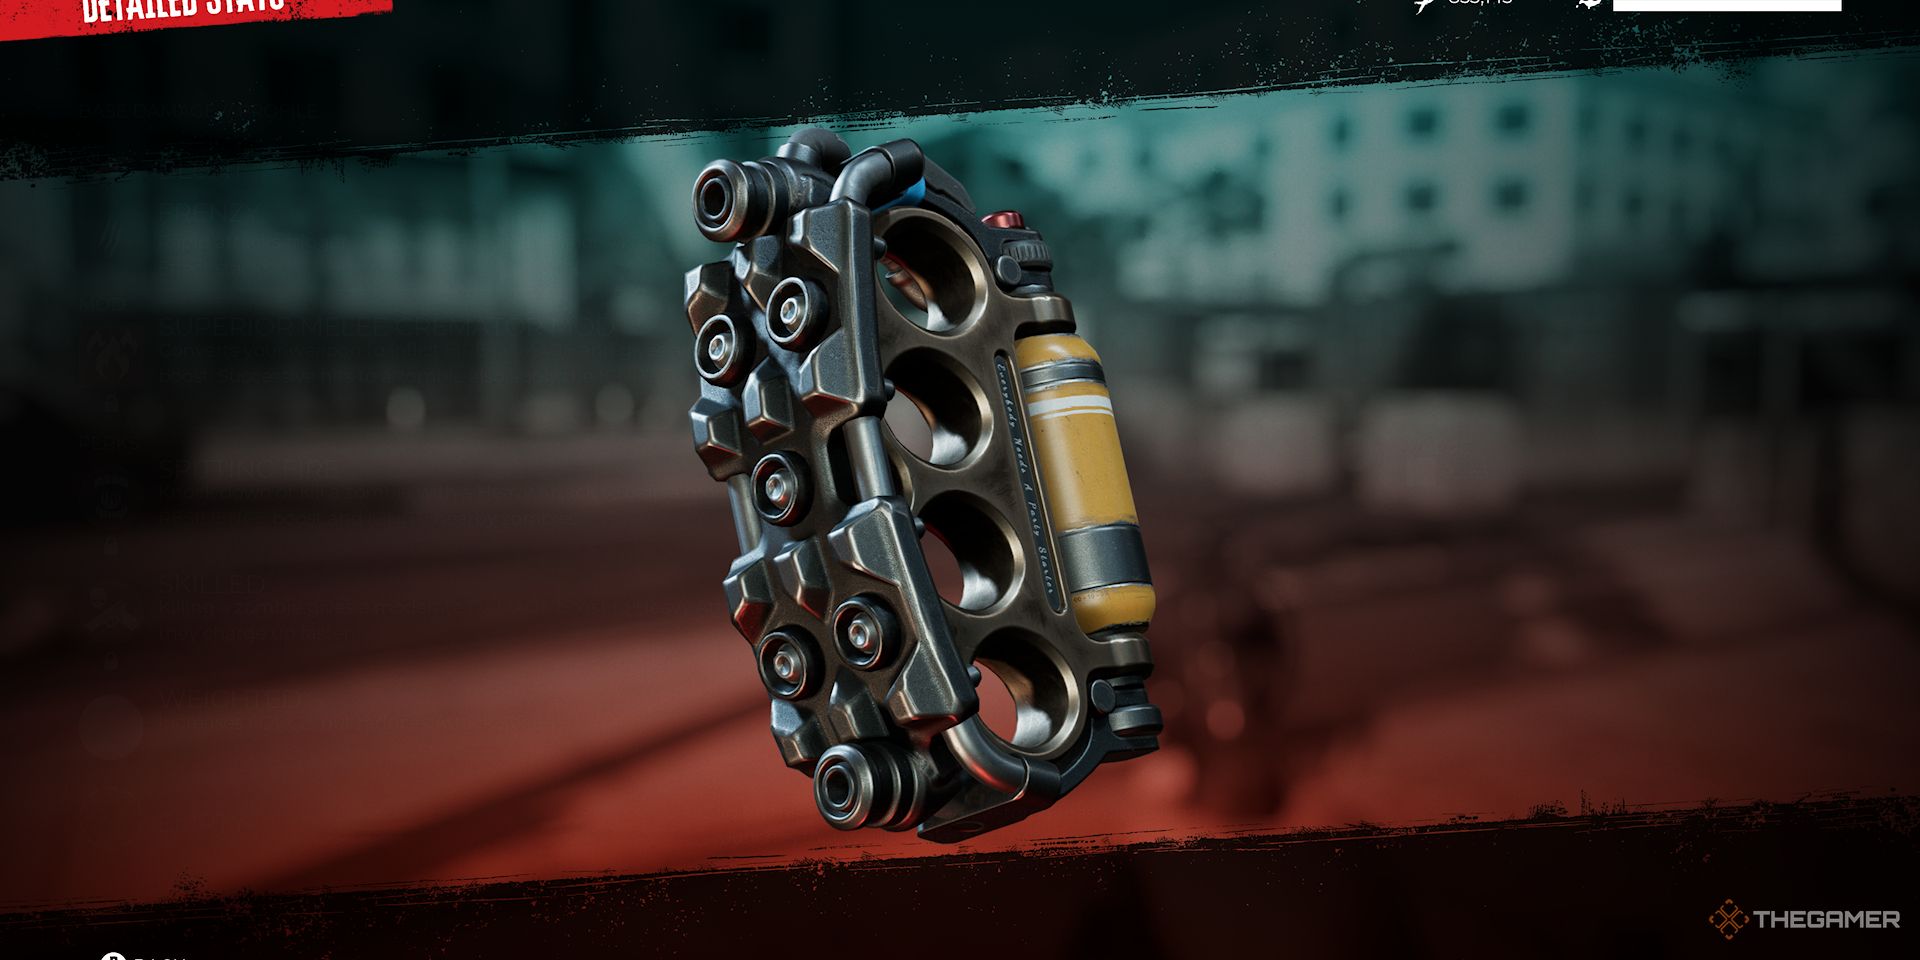 A close shot of the Party Starter Legendary Weapon in Dead Island 2.